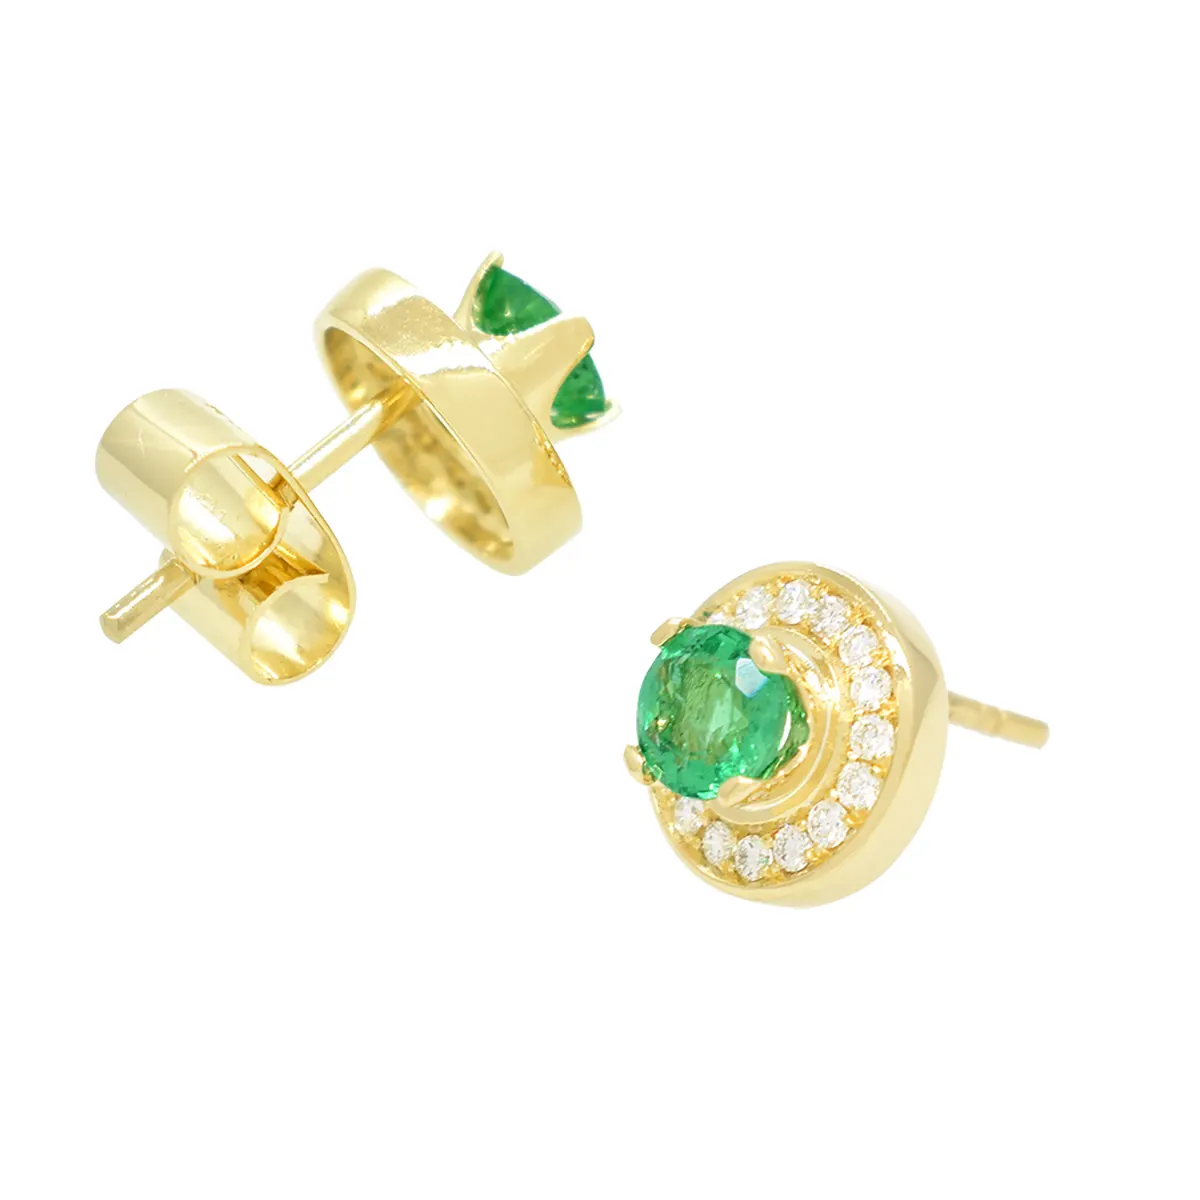 The surface of these emerald and diamond earrings is a combination of rich pave setting between the small diamonds and high polish gold on the edges that create a colorful look with the stunning color of the gems